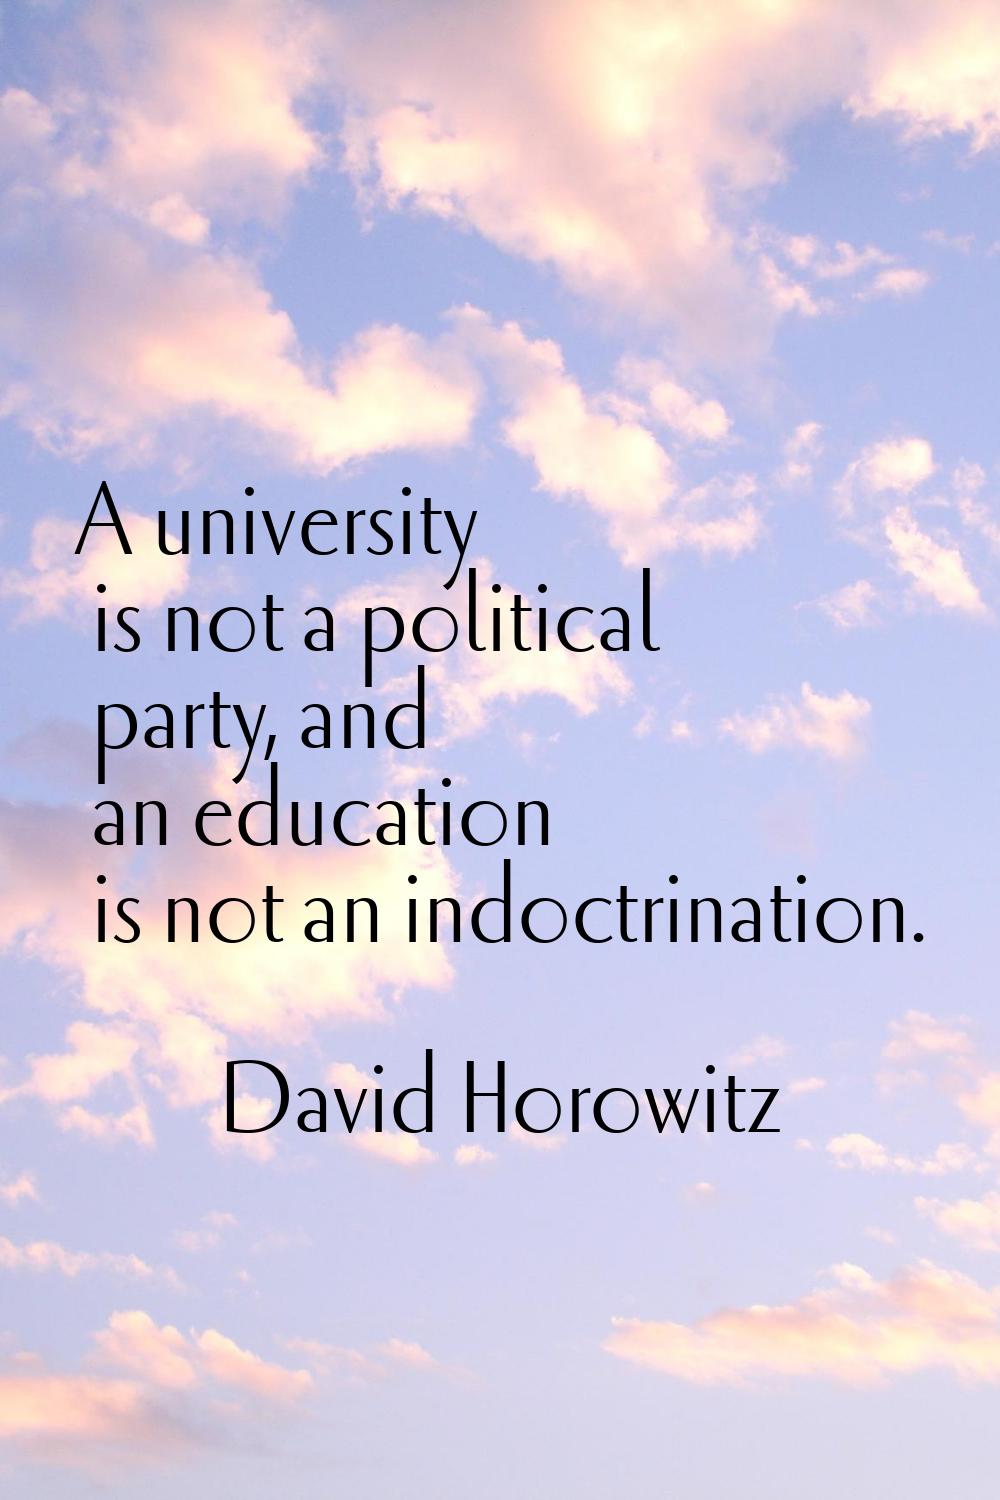 A university is not a political party, and an education is not an indoctrination.